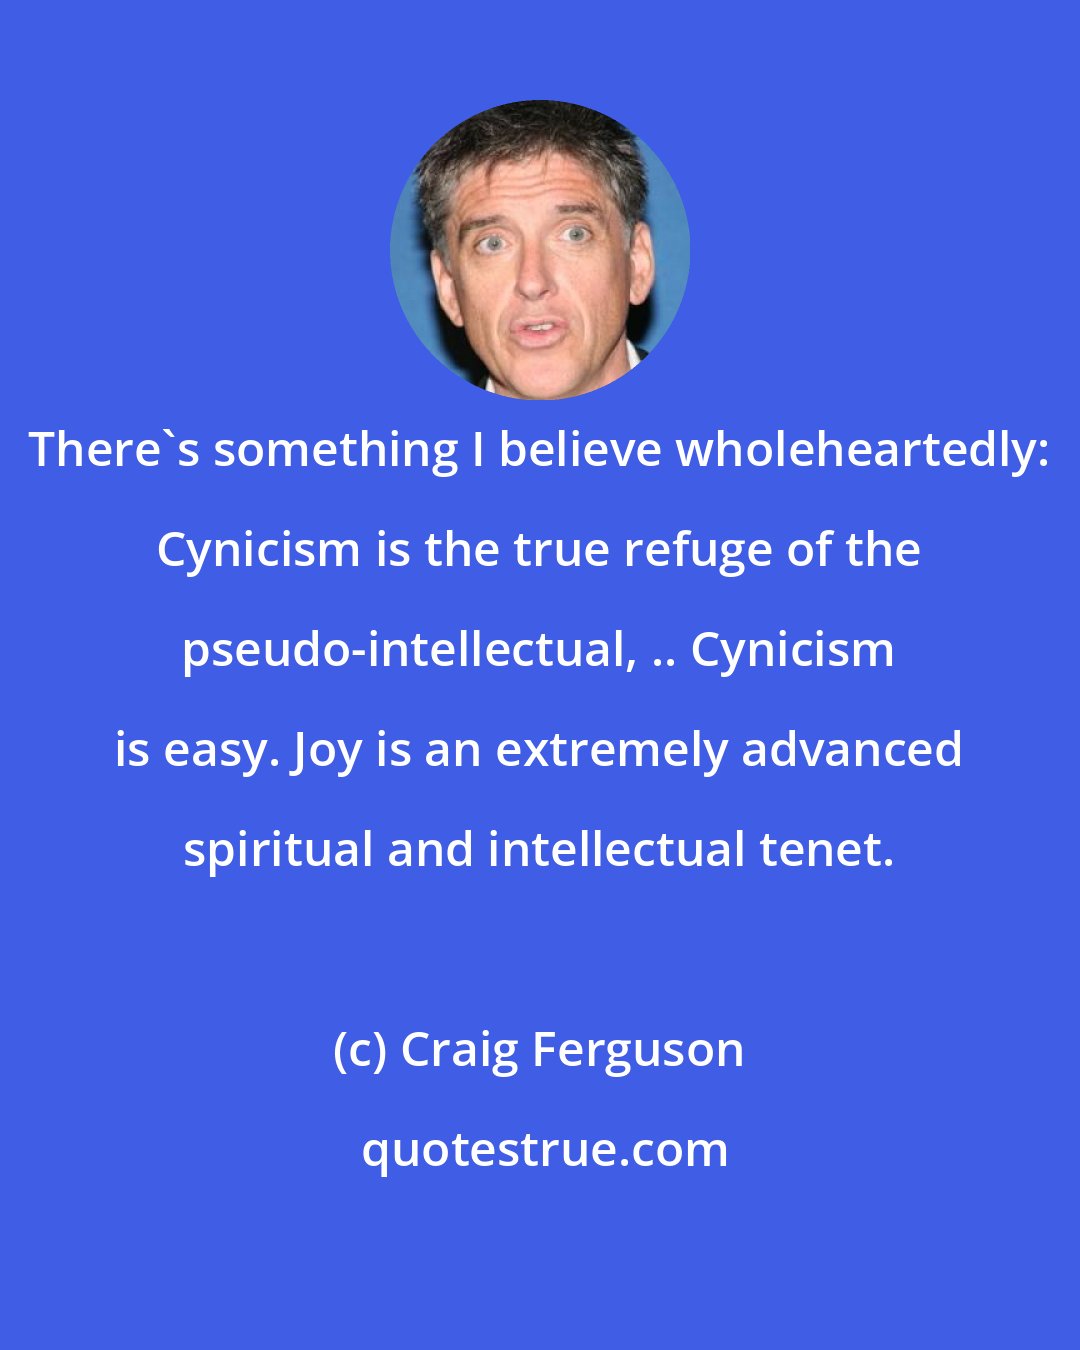 Craig Ferguson: There's something I believe wholeheartedly: Cynicism is the true refuge of the pseudo-intellectual, .. Cynicism is easy. Joy is an extremely advanced spiritual and intellectual tenet.